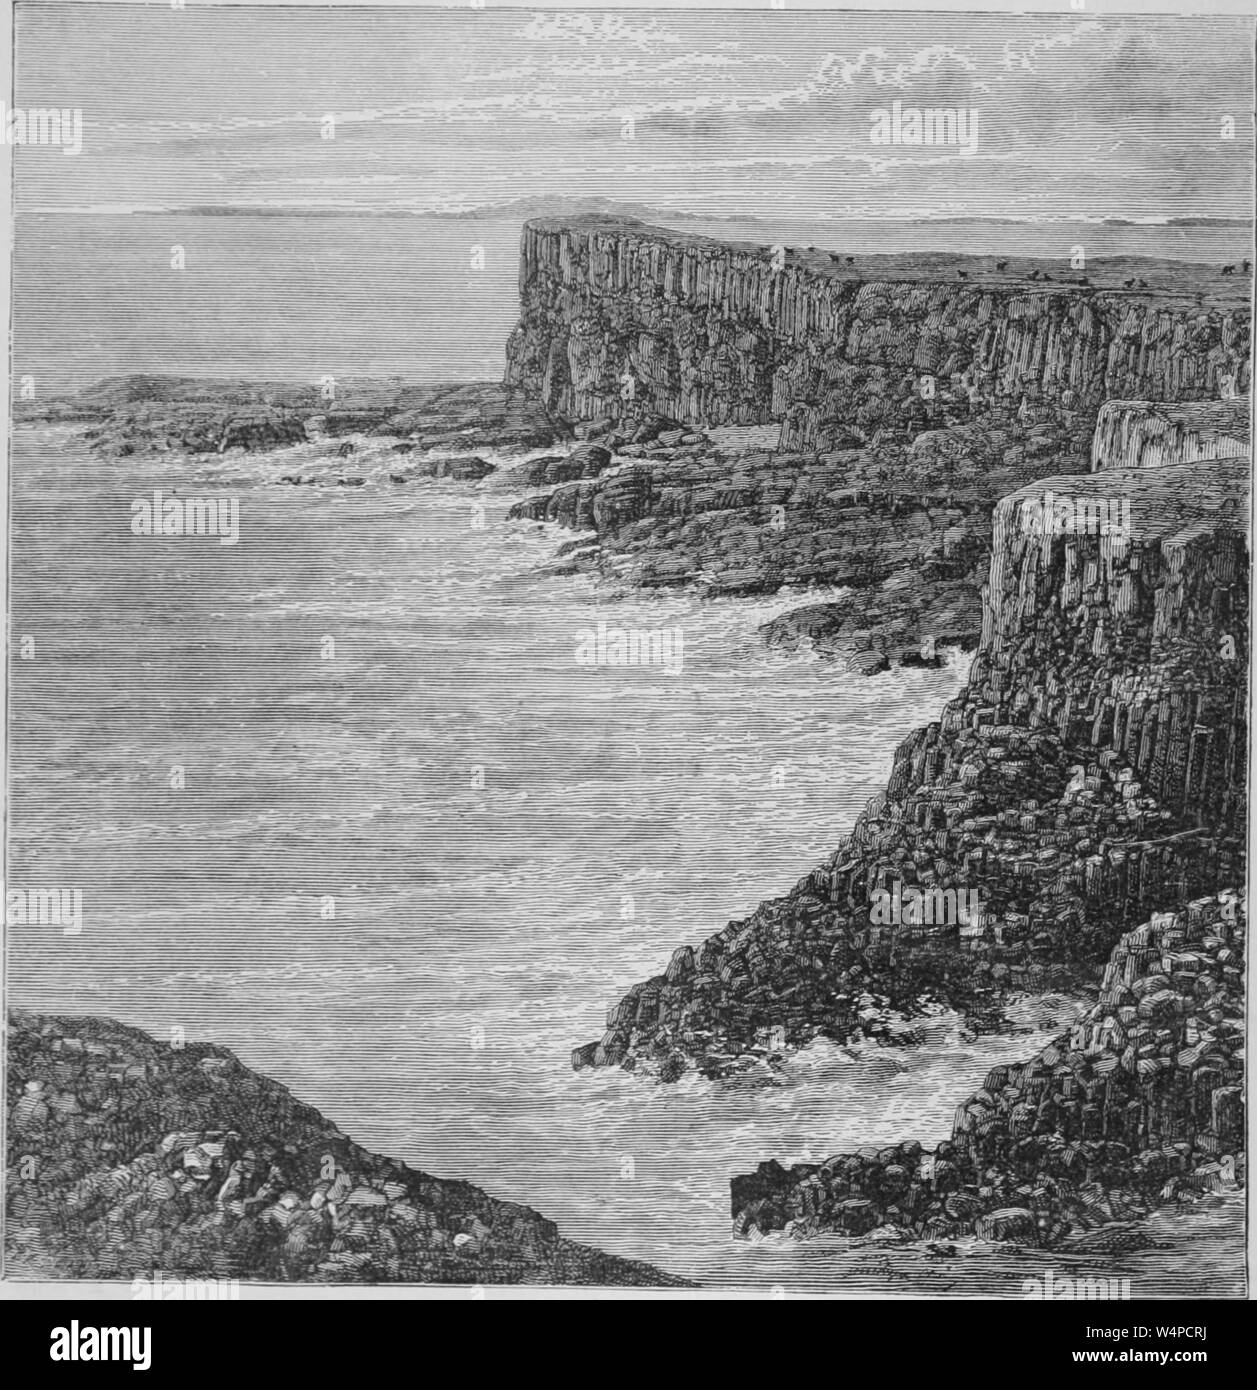 Engraving of the Hebrides Island's cliffs, Scotland, from the book 'The earth and its inhabitants' by Elisee Reclus, 1881. Courtesy Internet Archive. () Stock Photo